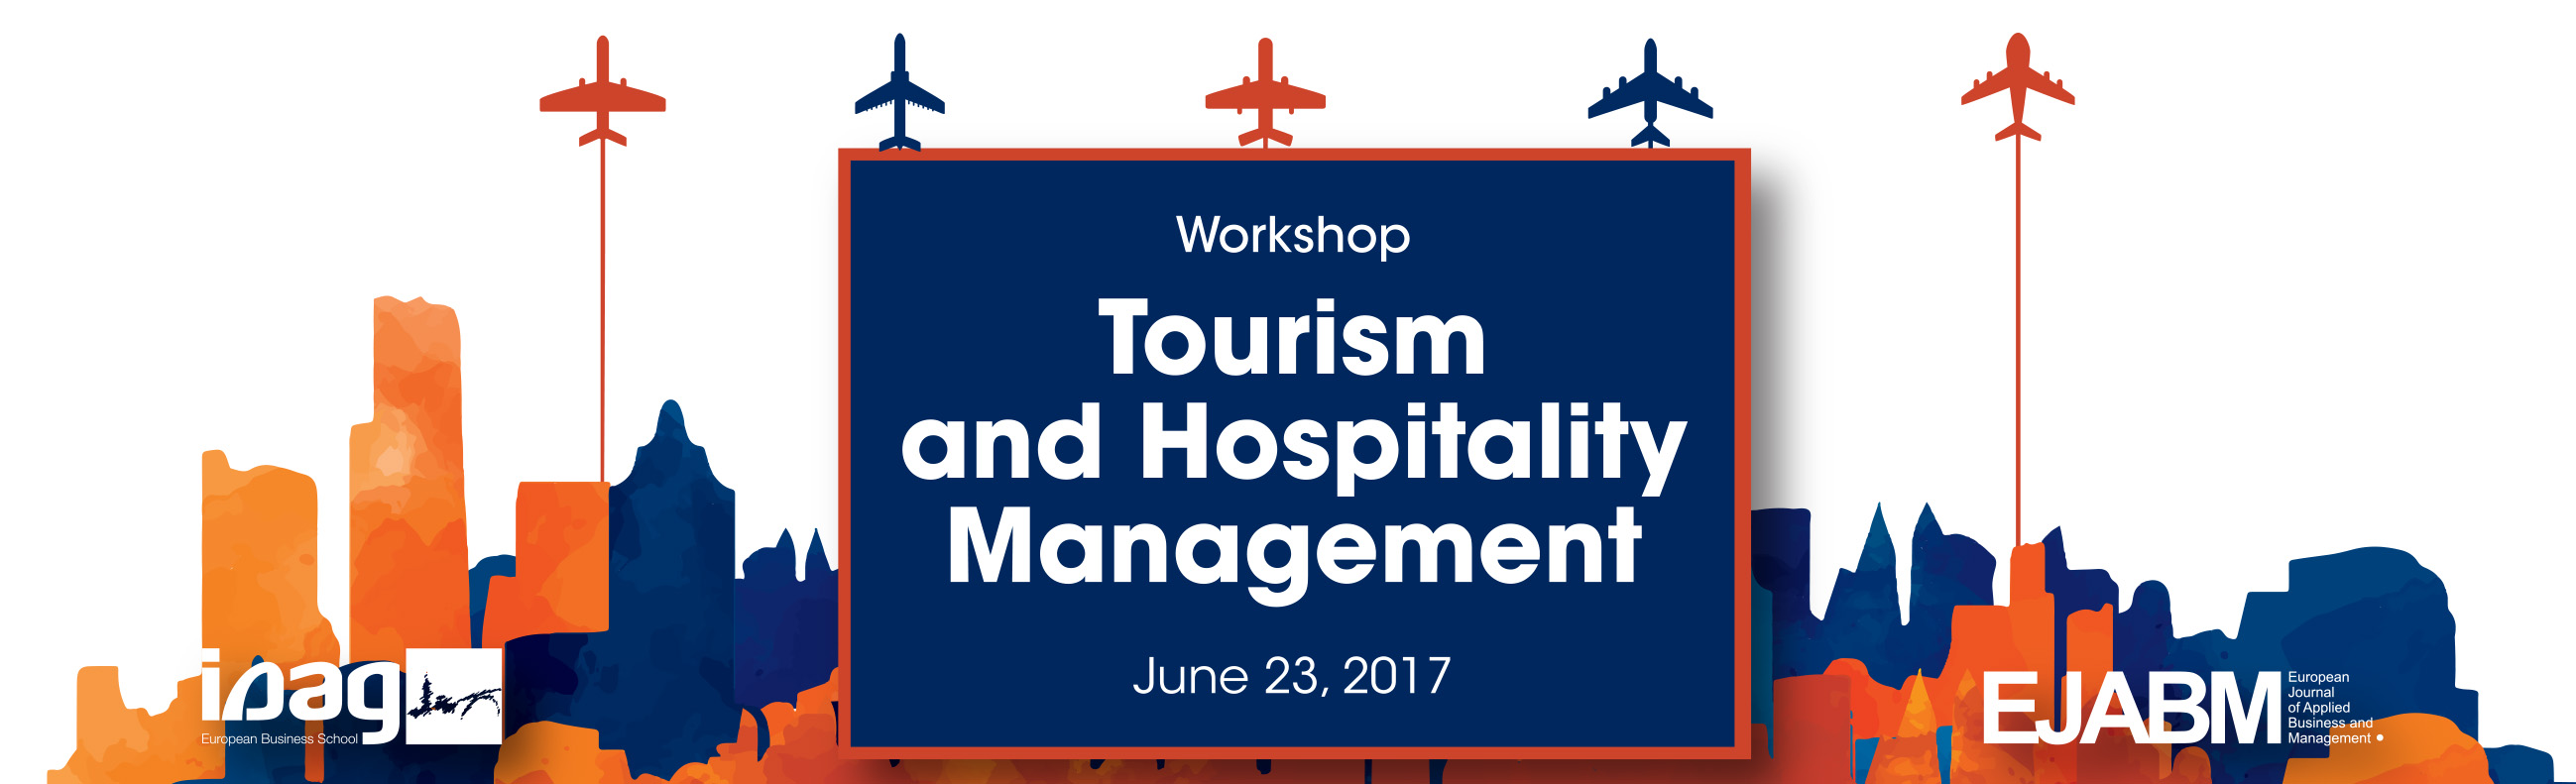 Considering the powerful performance of national and international tourism, NIDISAG (ISAG Research Centre) decided that this is the appropriate moment to hold the first Workshop on Tourism and Hospitality Management, in order to share knowledge in the scientific domains of tourism and hospitality among the several participants. 